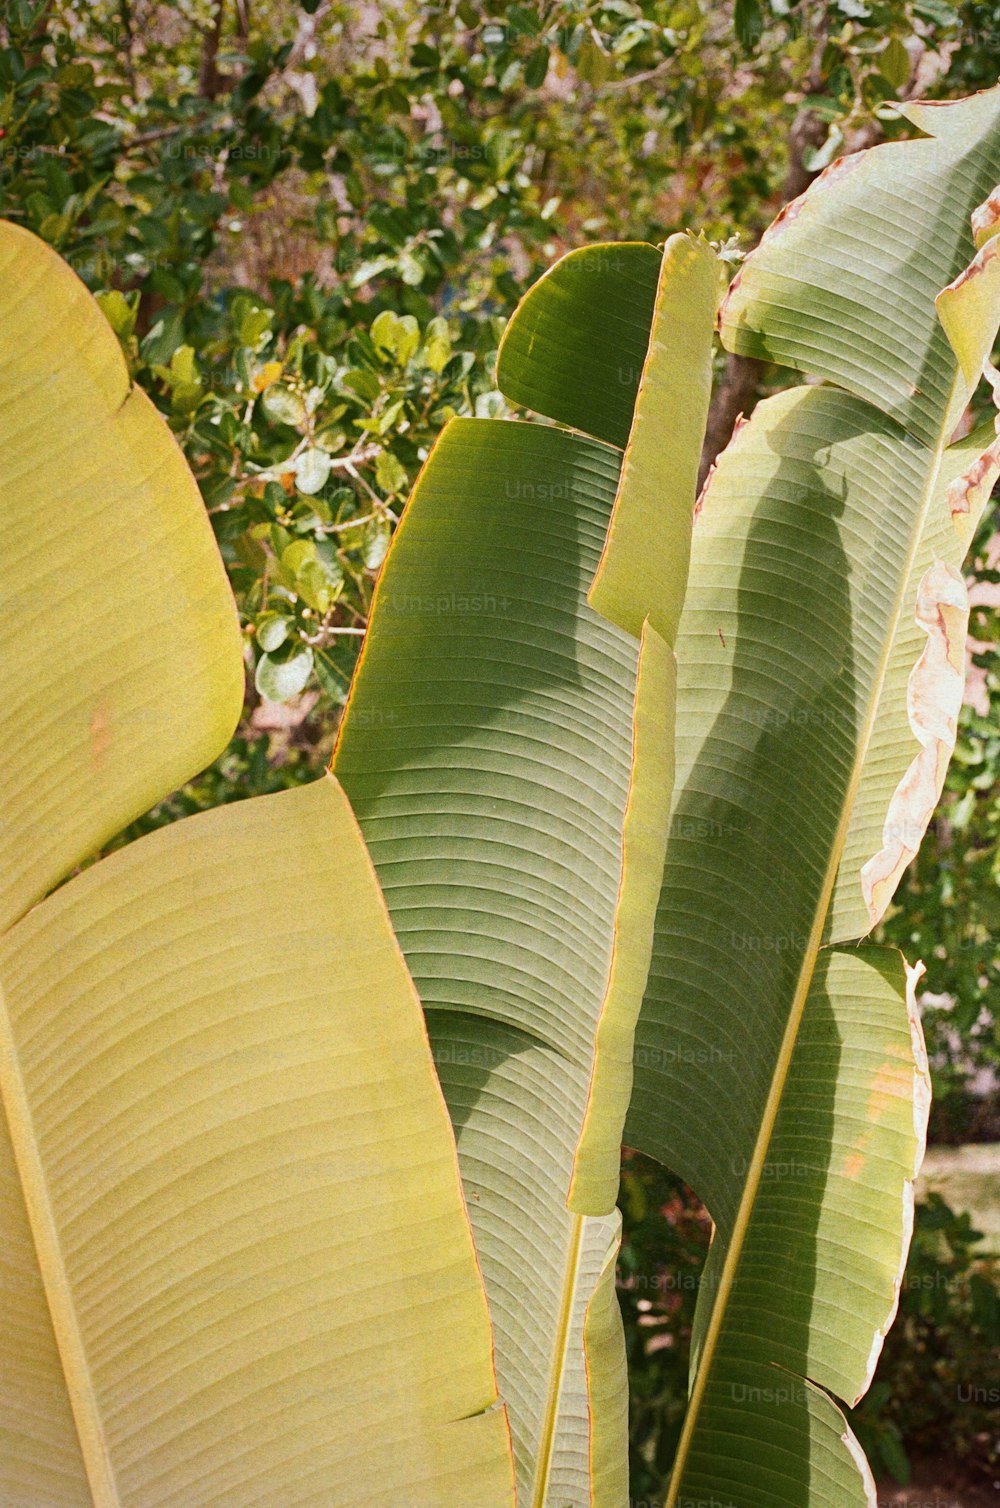 a banana tree with a bird perched on top of it